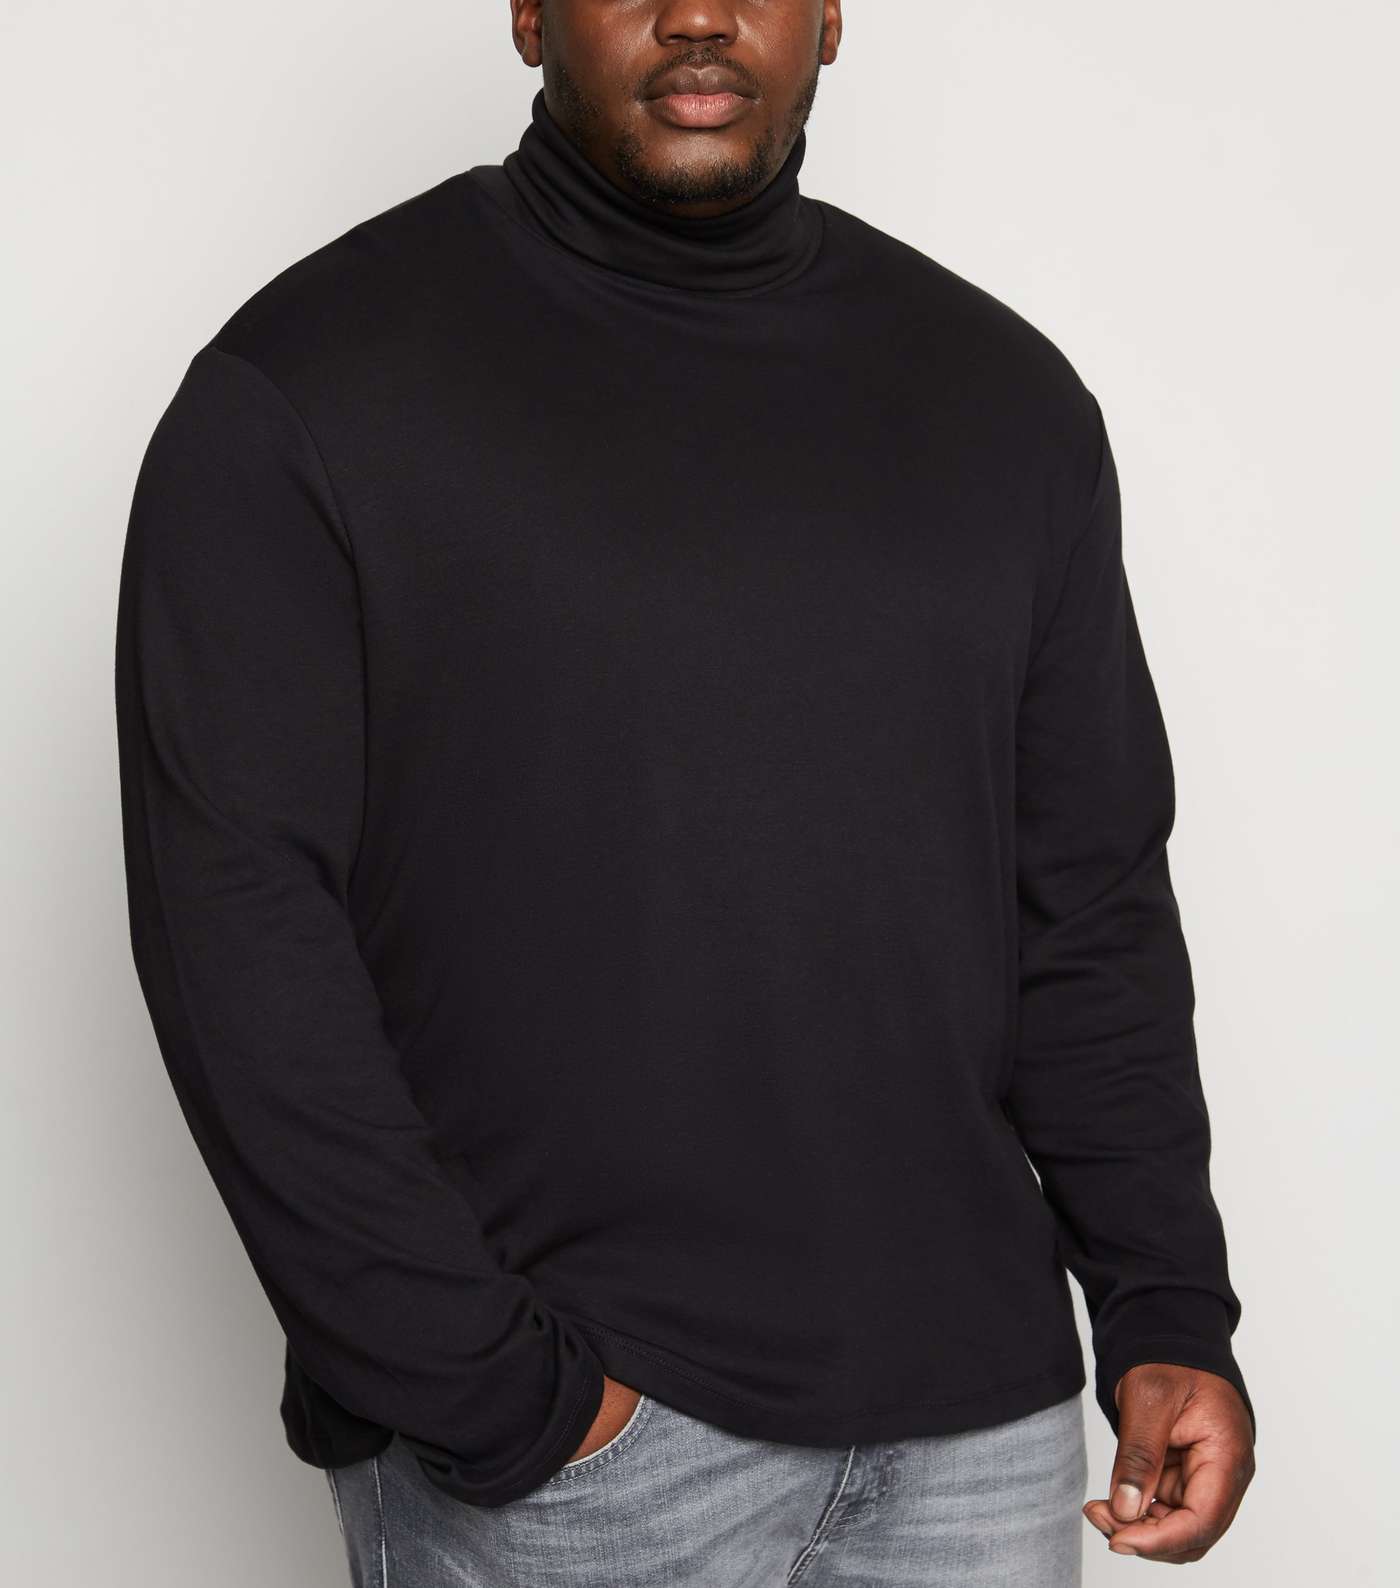 Plus Size Black Long Sleeve Roll Neck Top